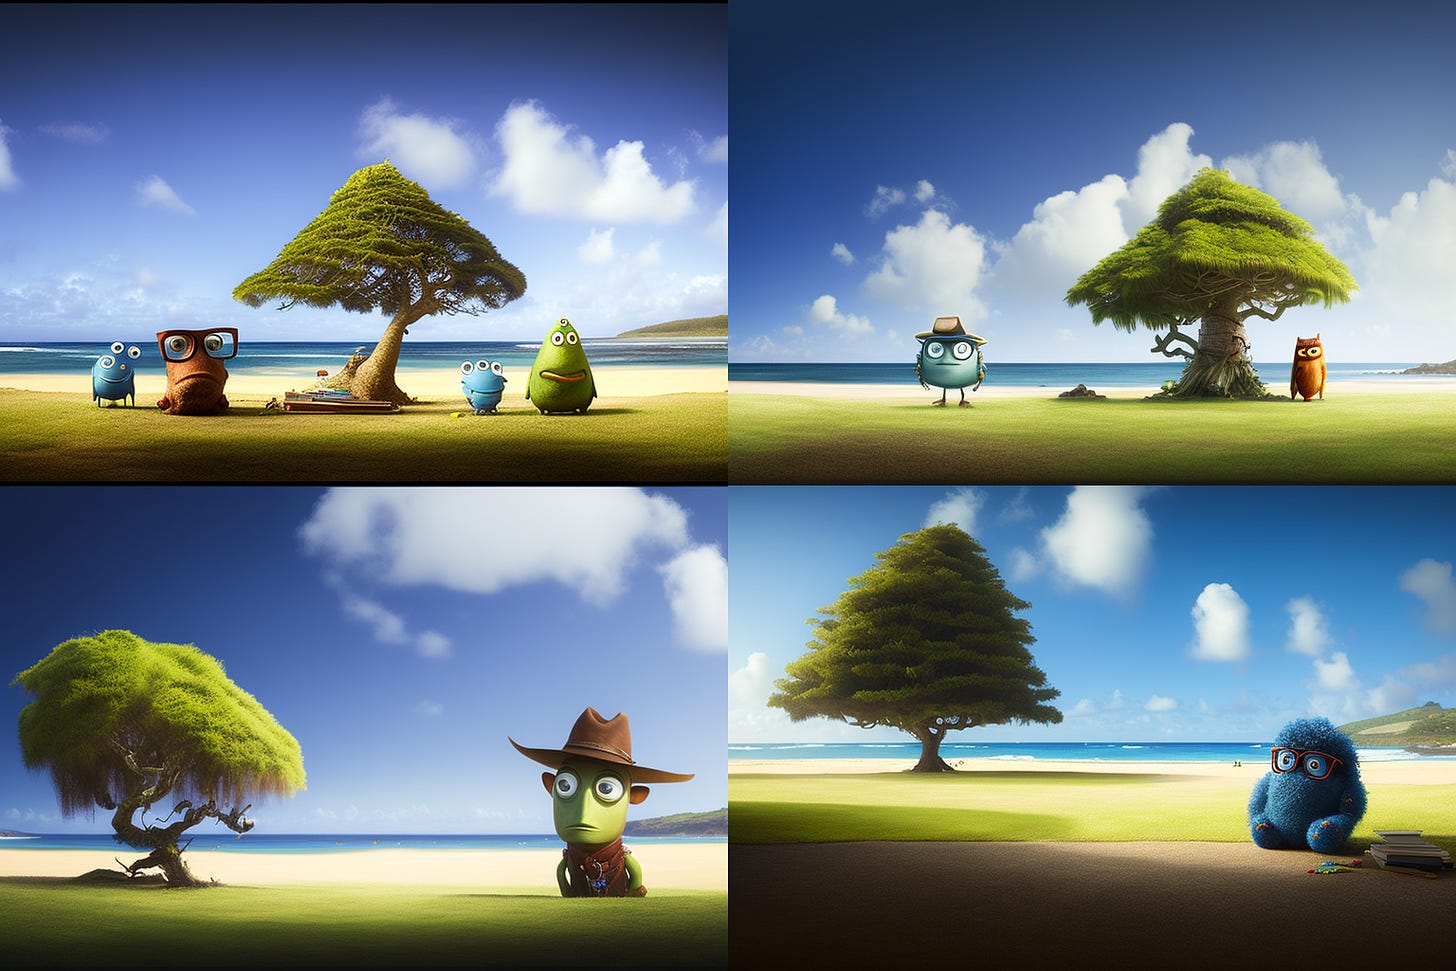 MJ V4 results for "Pixar cartoon" mixed with an image of a tree